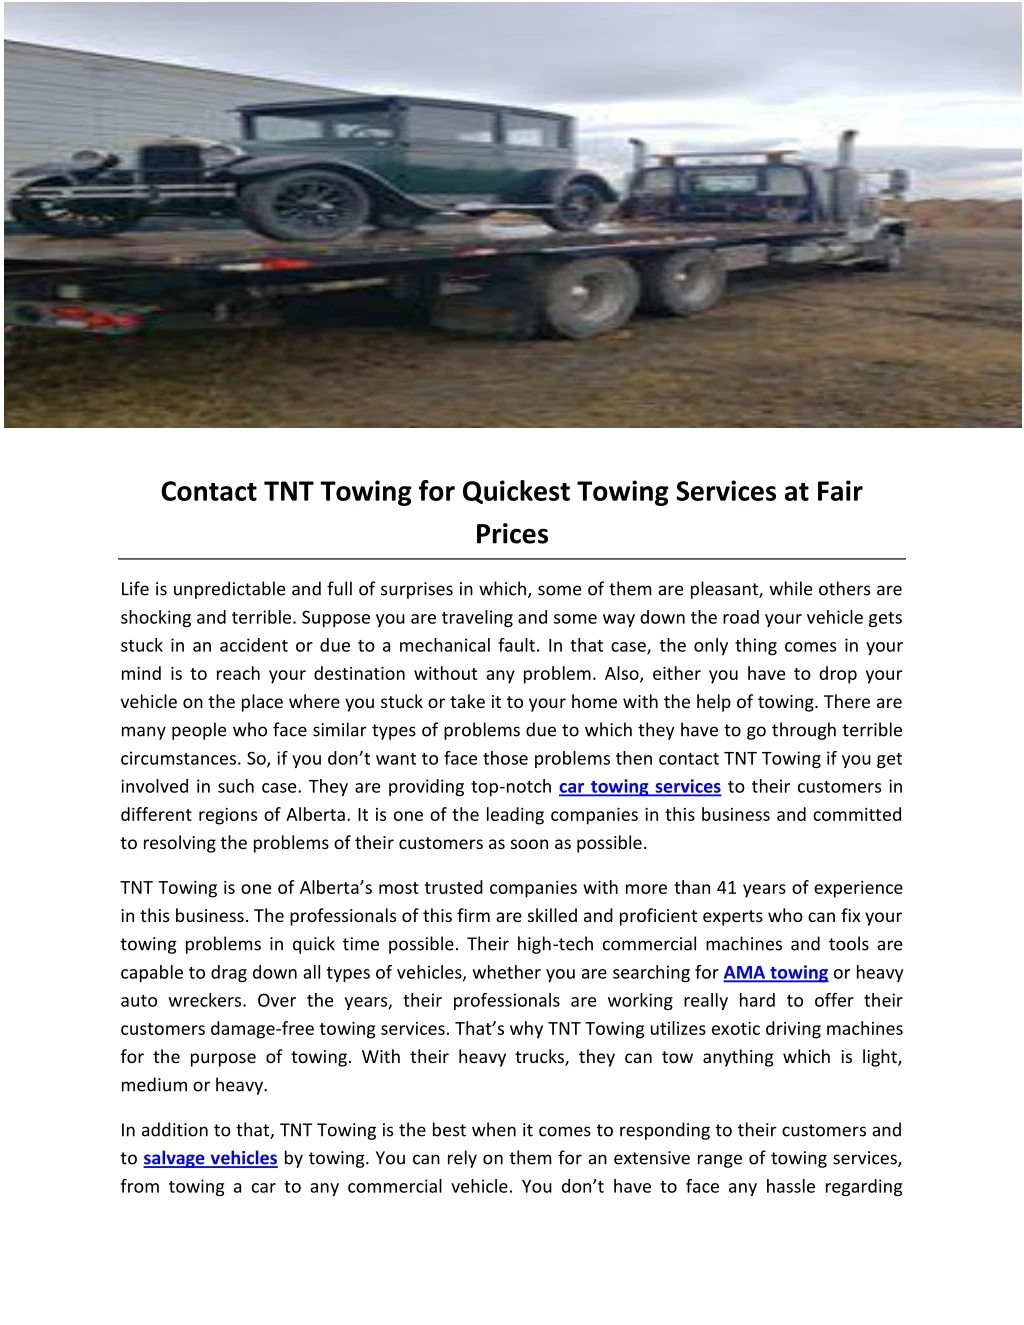 contact tnt towing for quickest towing services